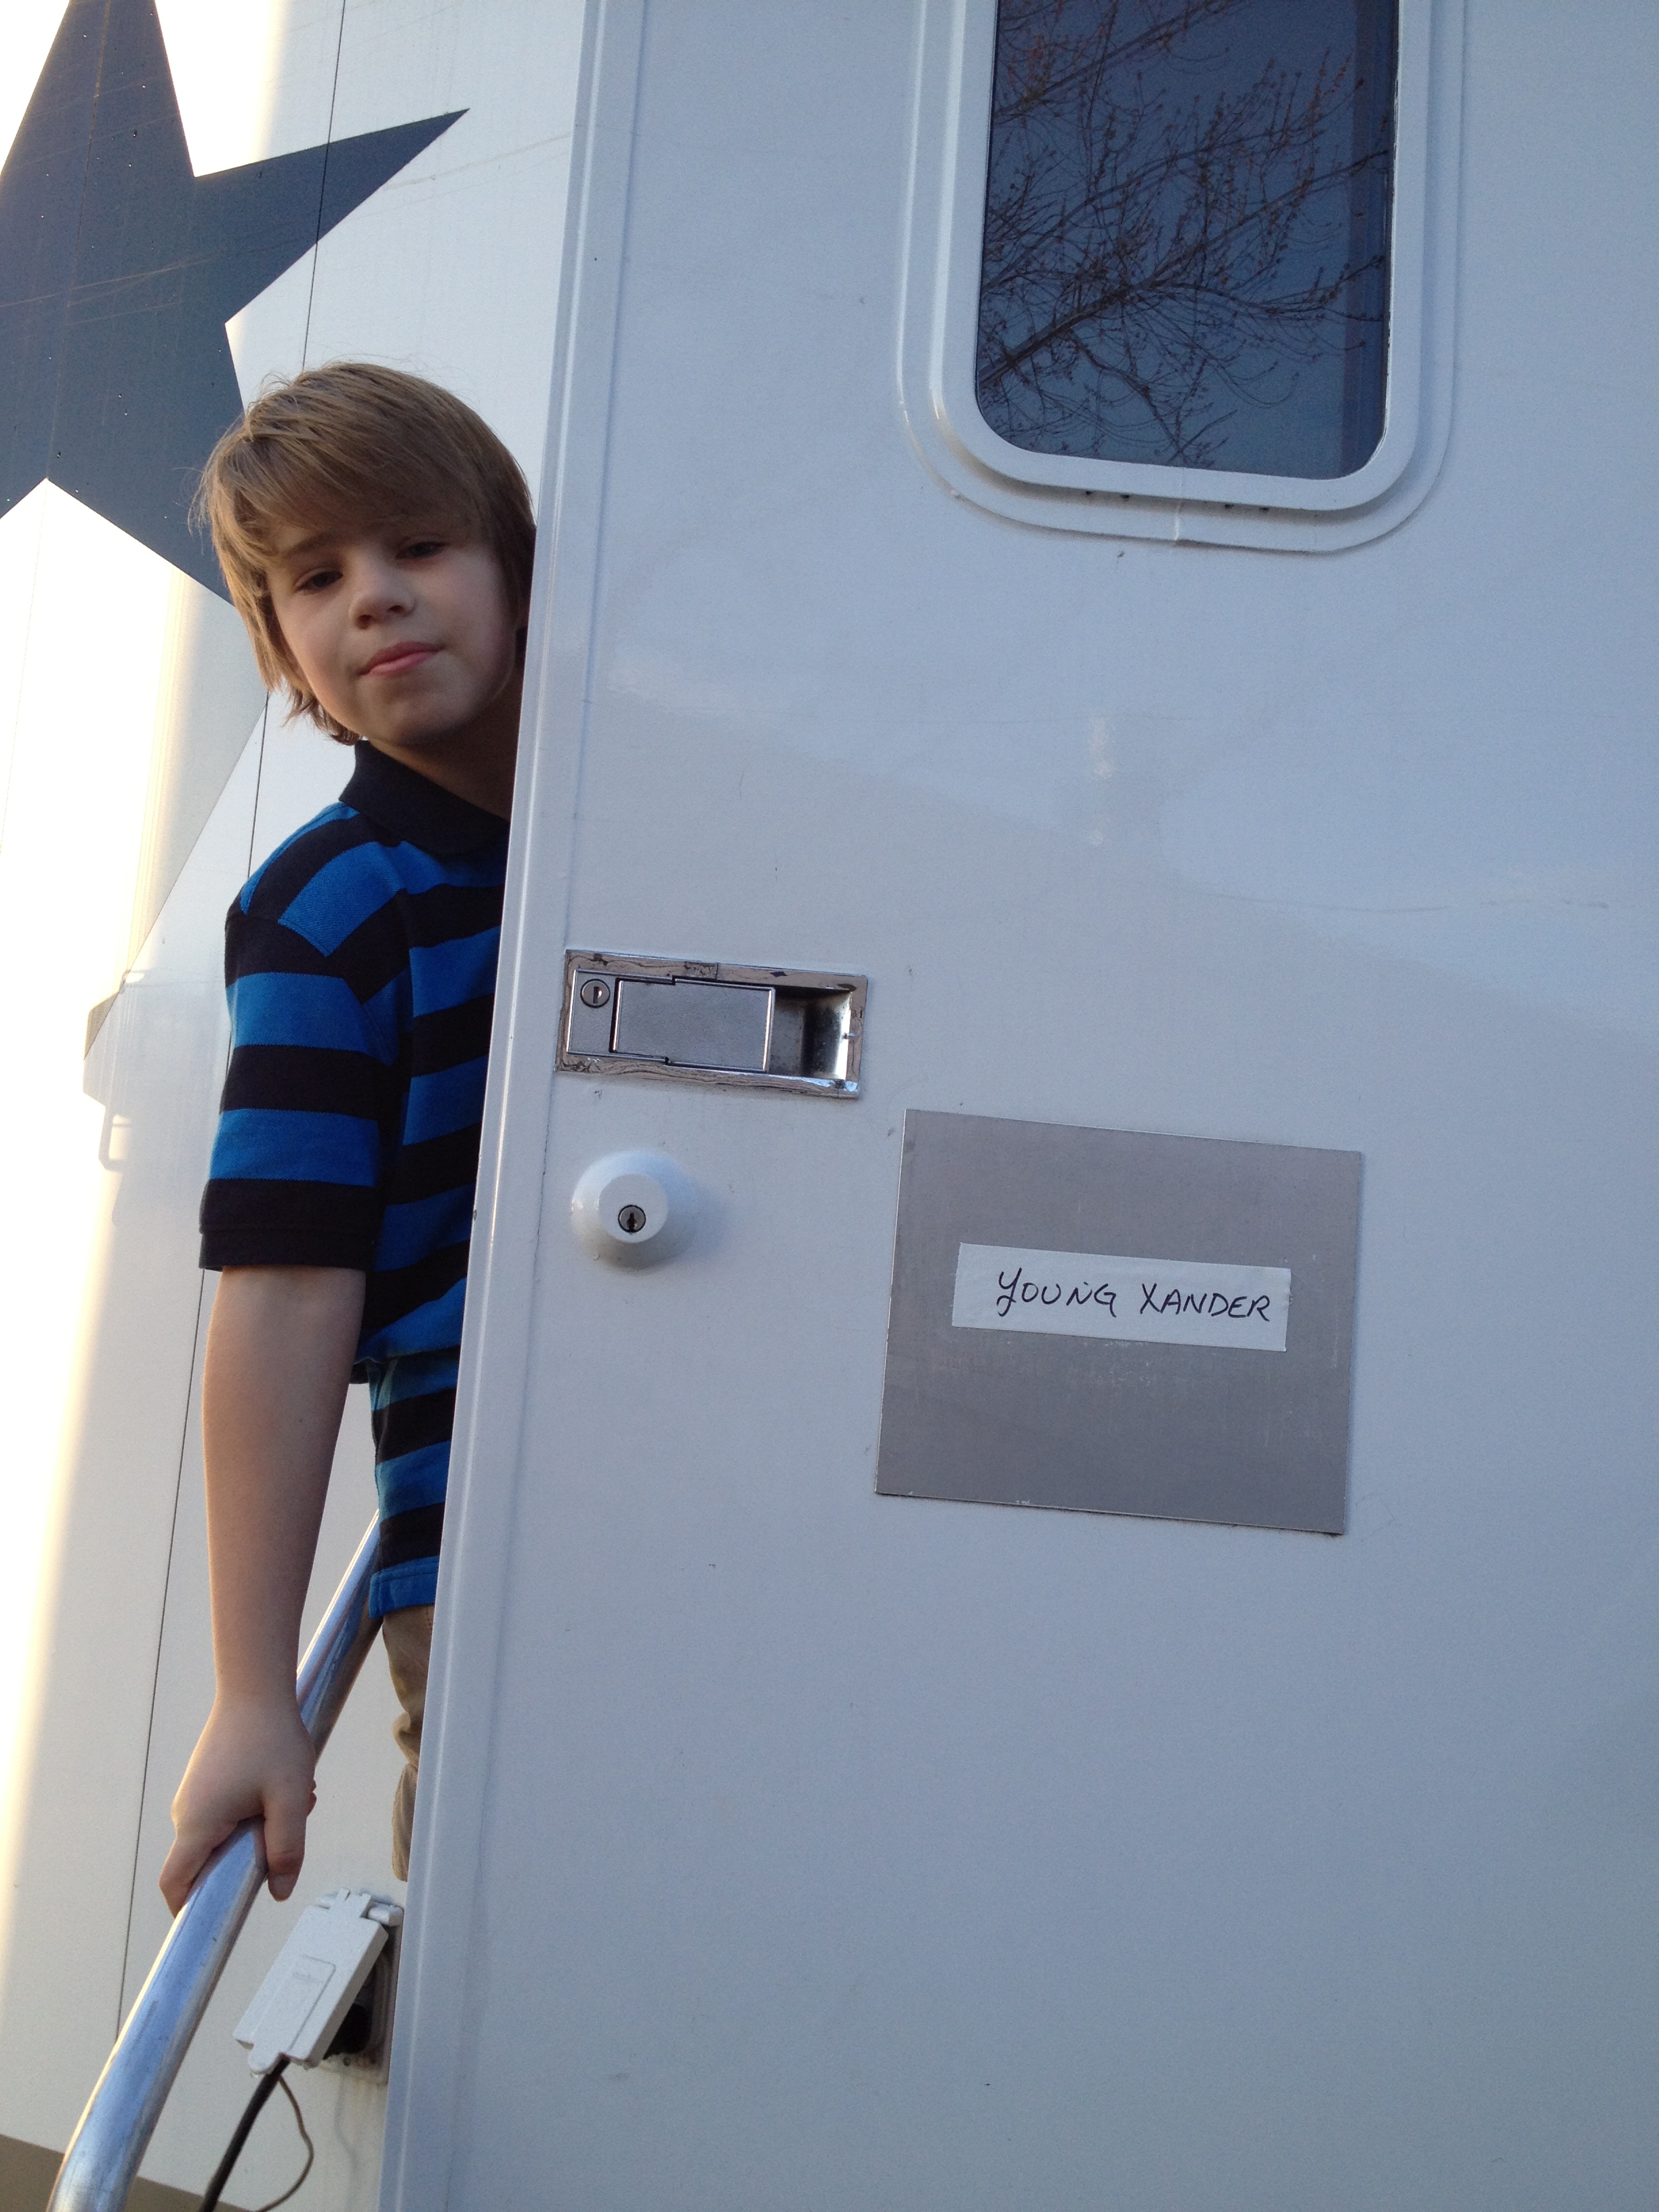 Daven Pitkin as Young Xander on set of Sea of Fire TV movie 2014.(uncredited ~ photo still)